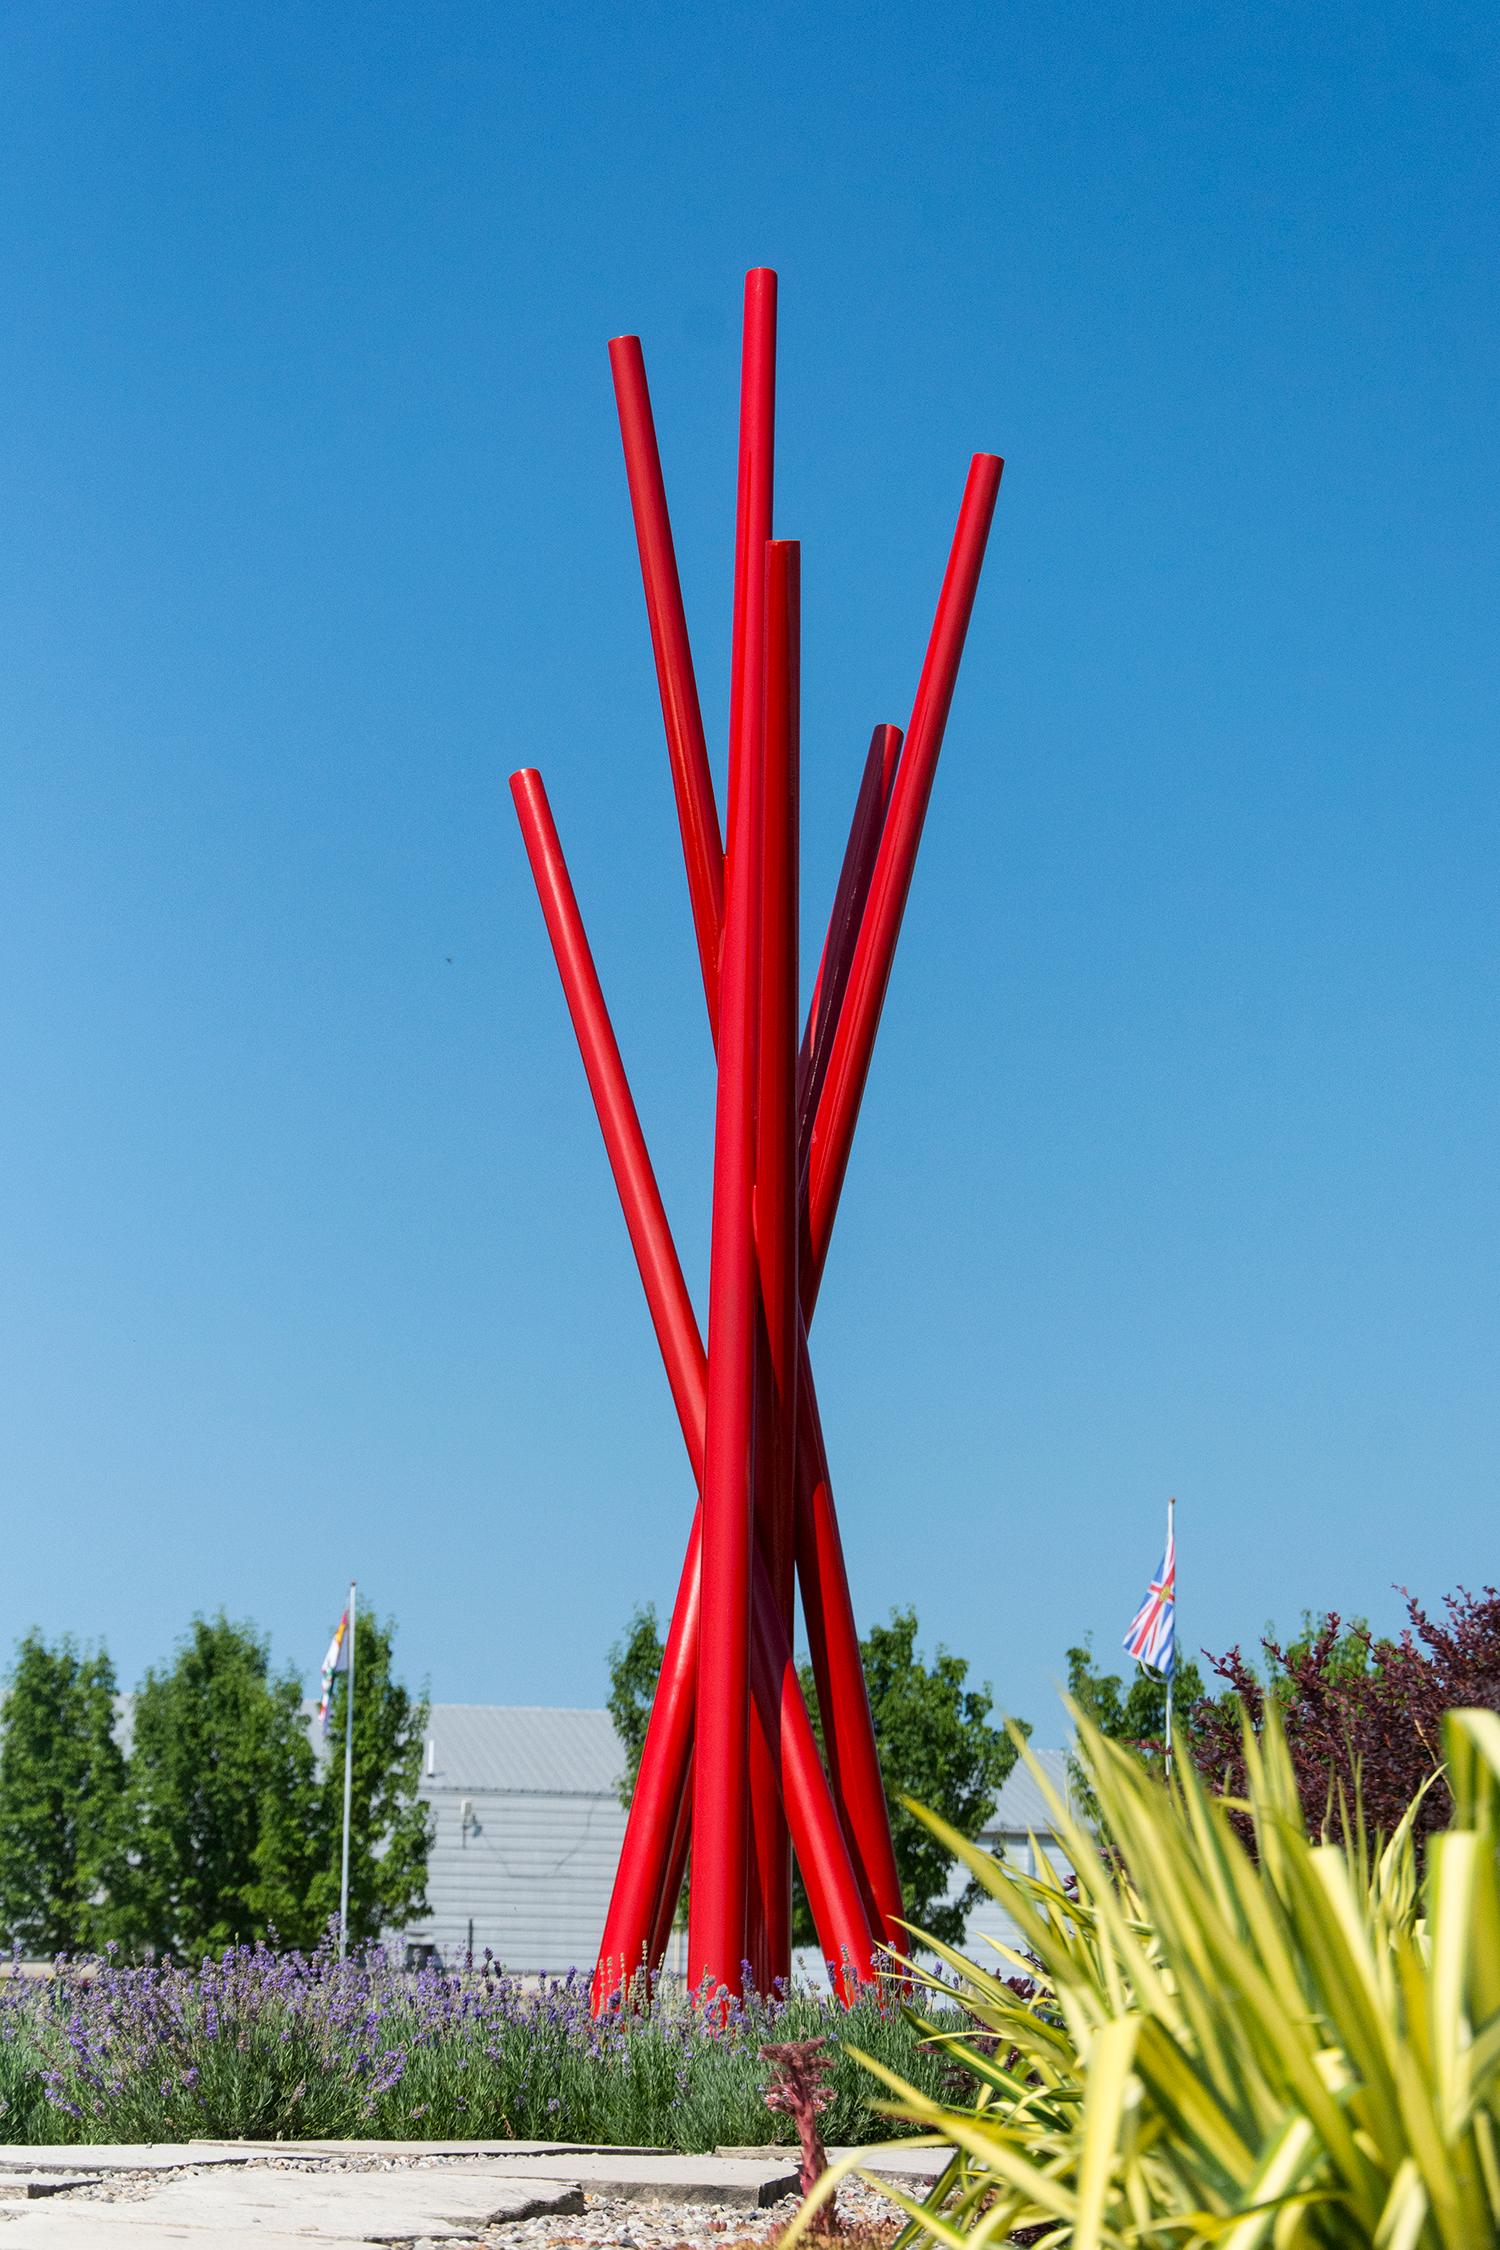 Shayne Dark Abstract Sculpture - Intersect - Large Abstract Outdoor Sculpture in Vibrant Red